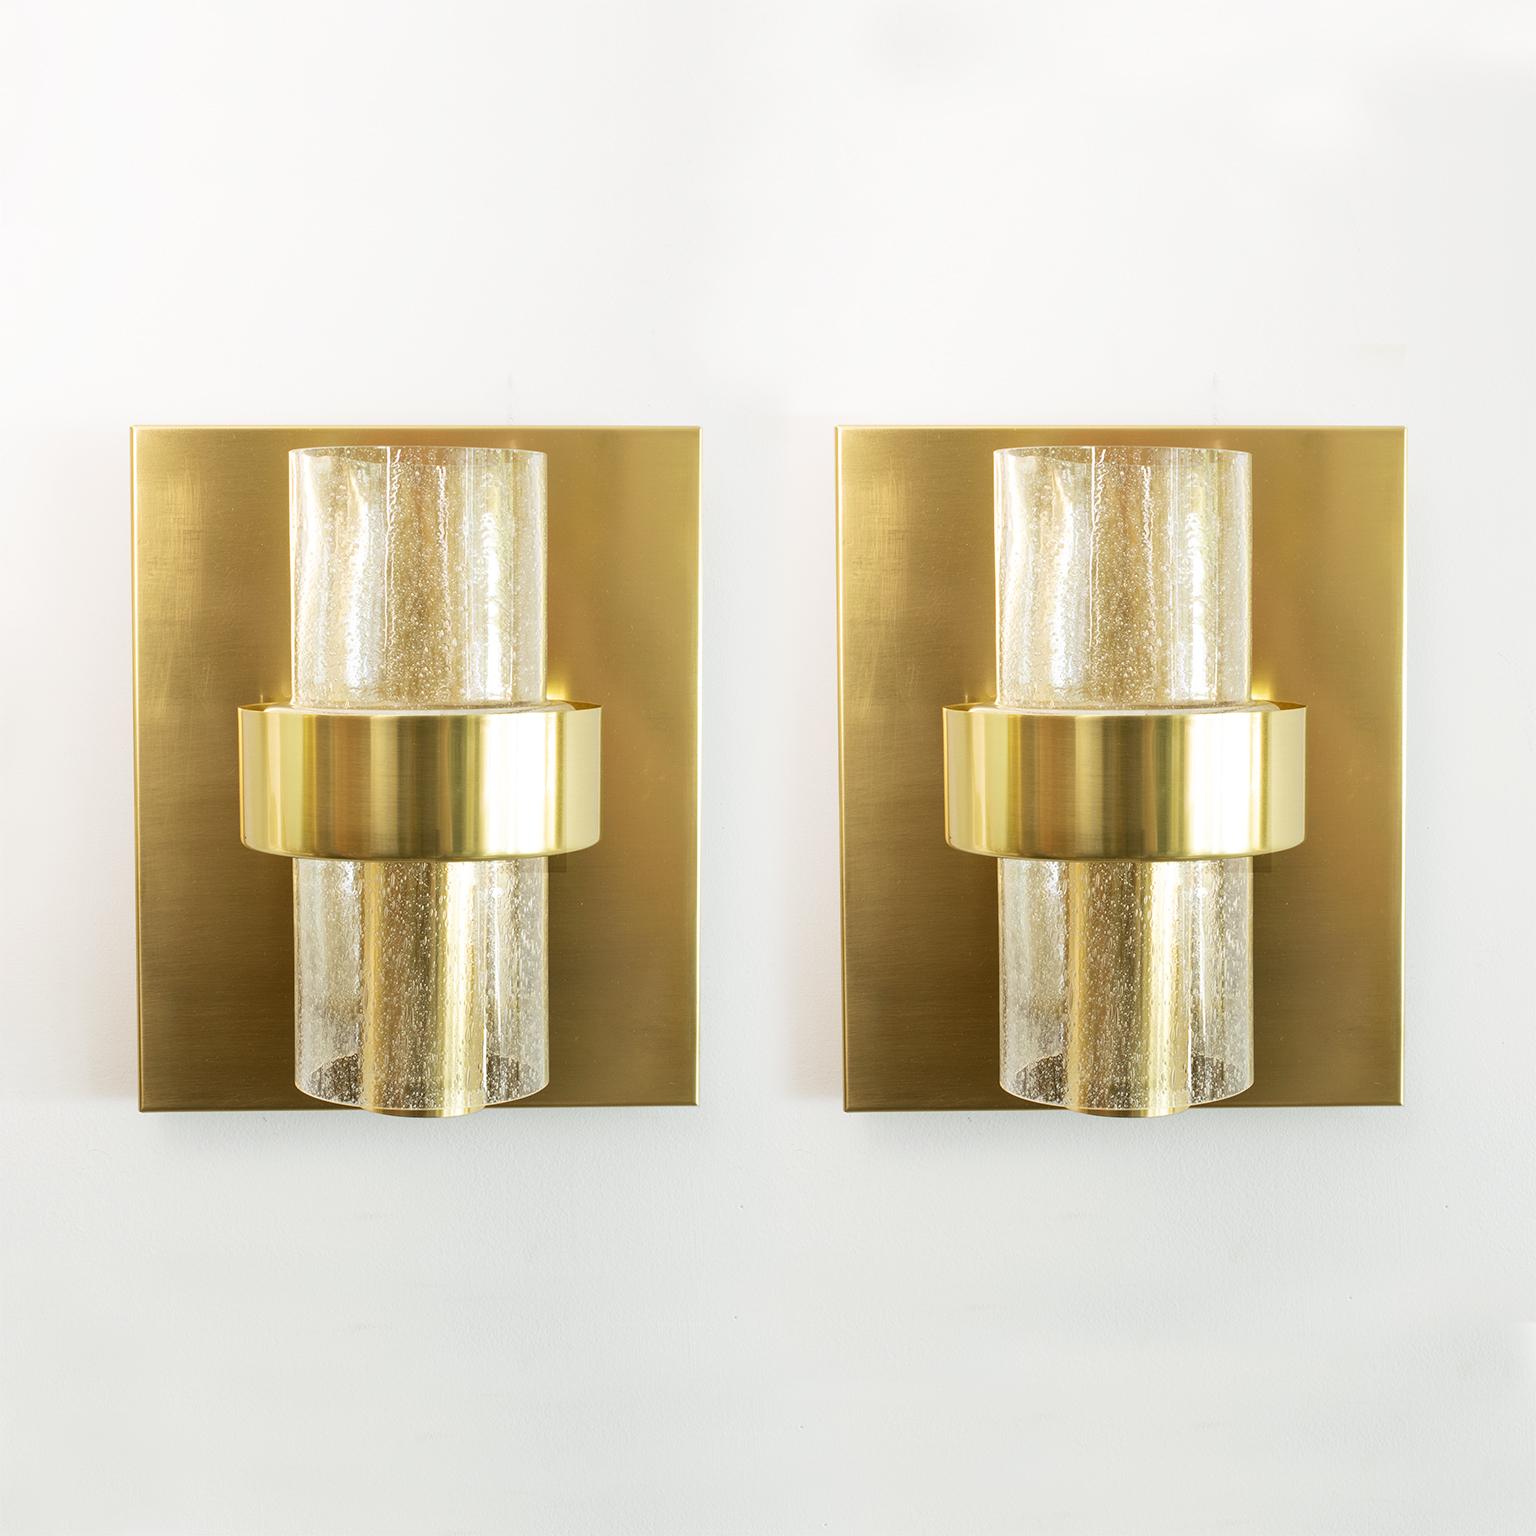 Polished Pair of Scandinavian Modern Sconces in brass by Jonas Hidle, Norway, 1970